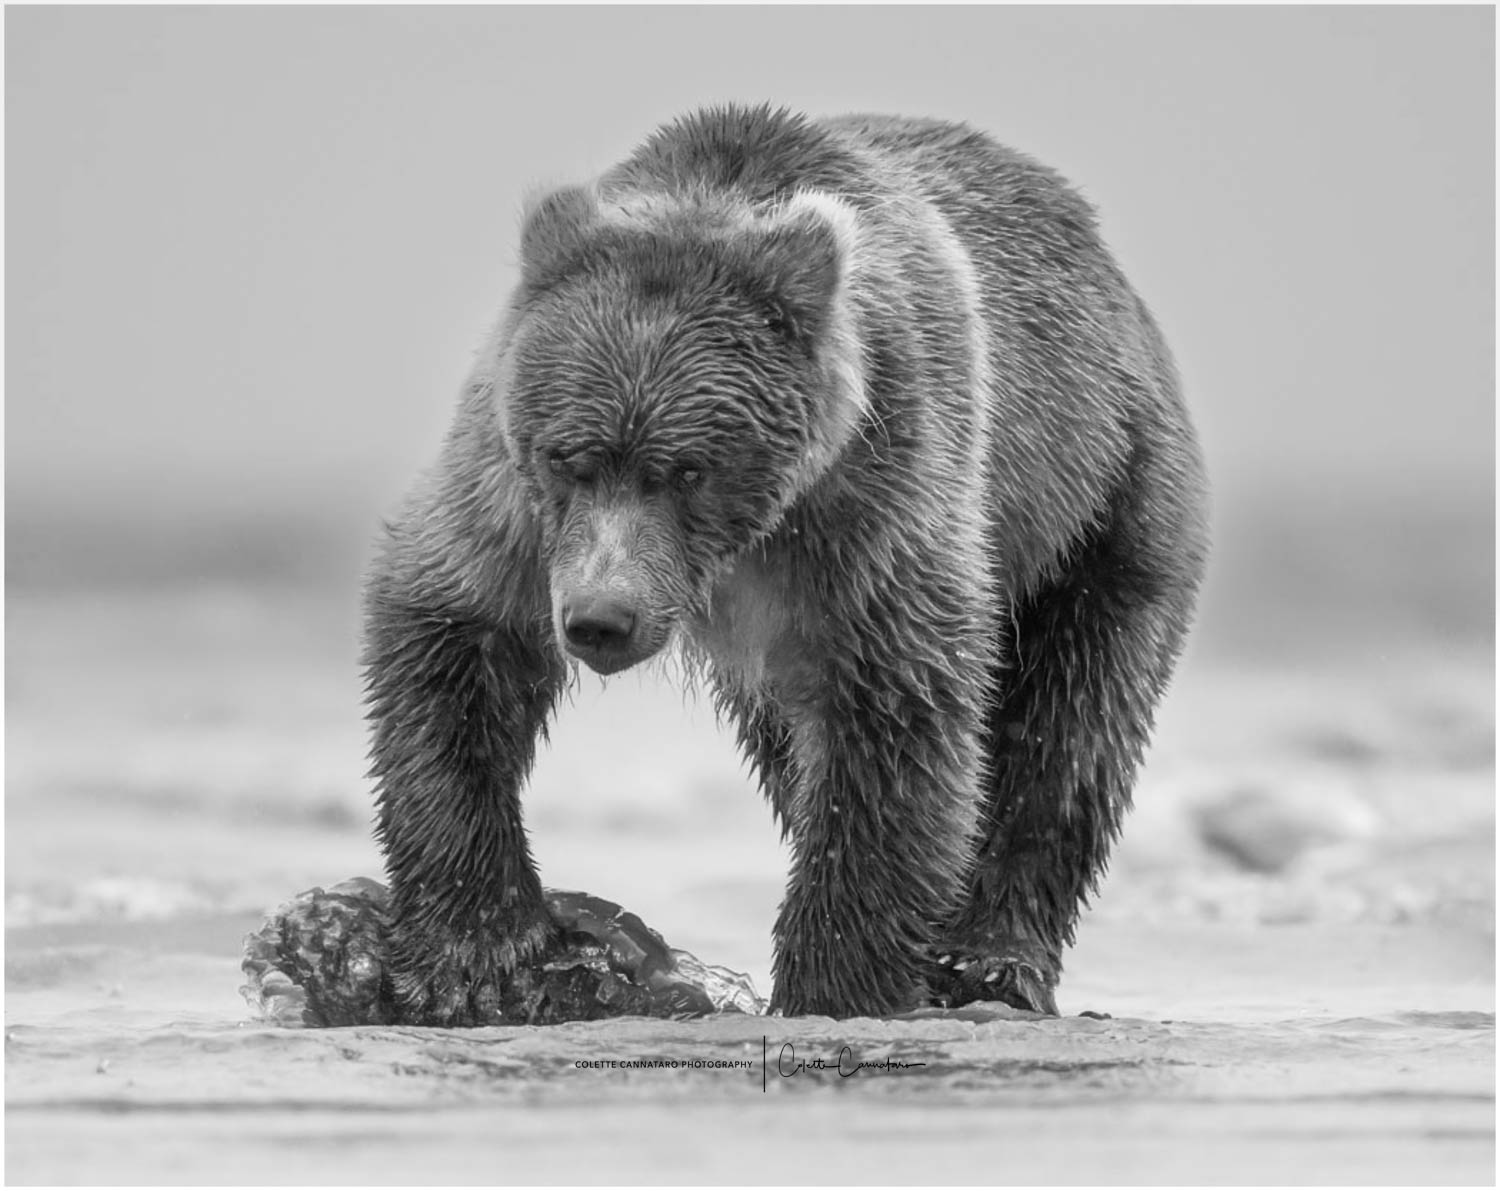 Before the salmon run fully starts in Alaska, the coastal brown bears survive on sedge grass and clams.  Their massive claws...